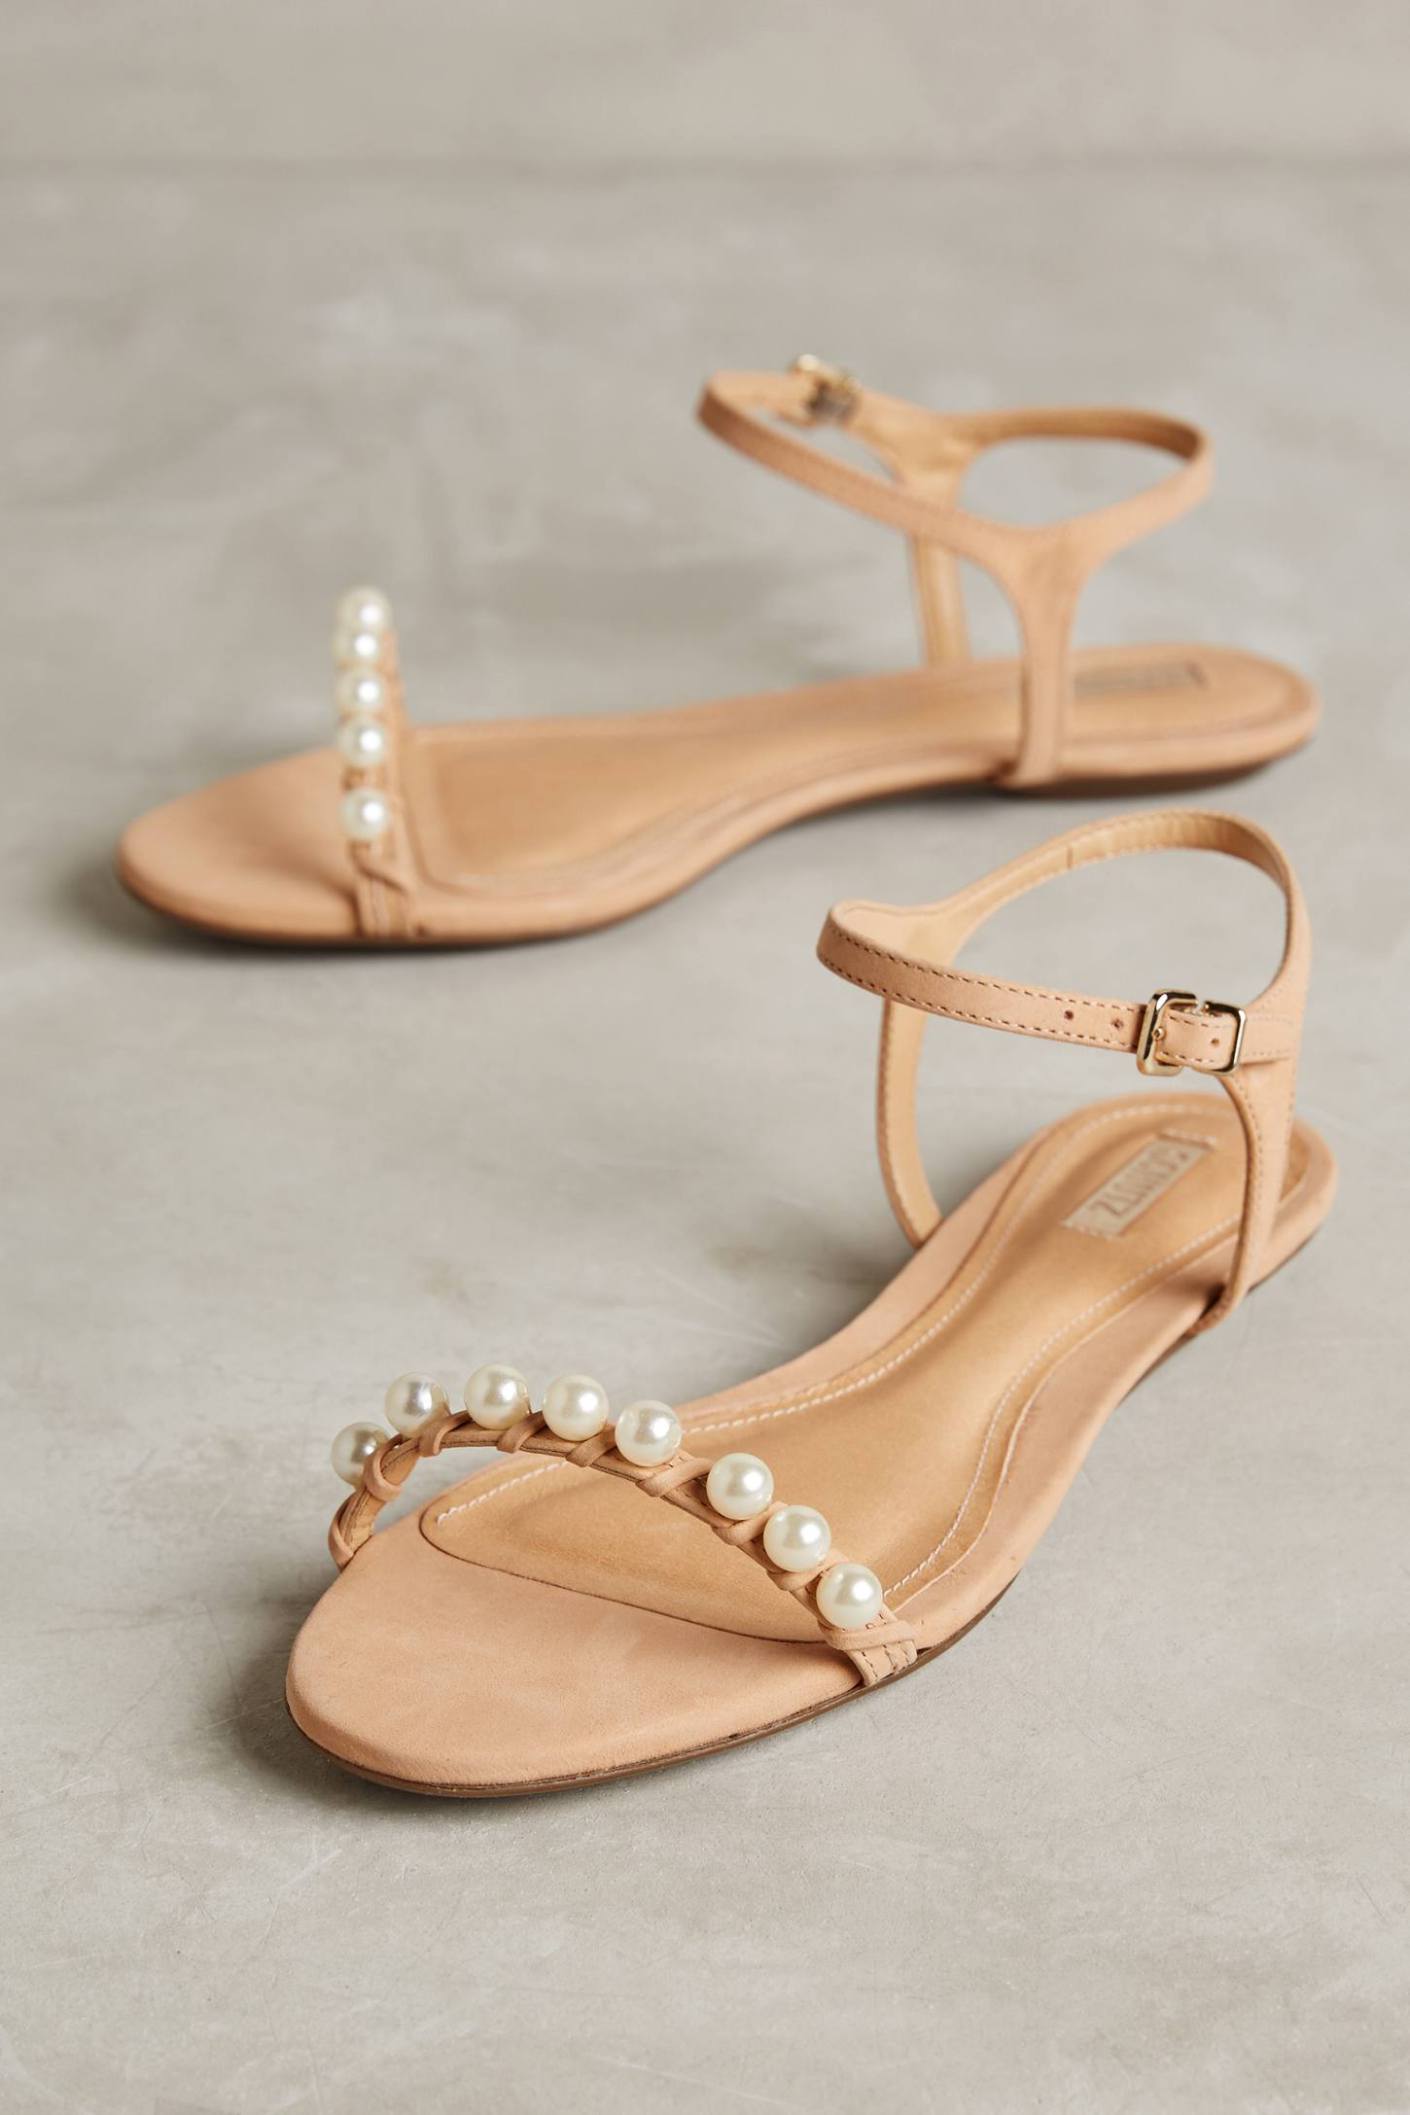 nude flat sandals for wedding